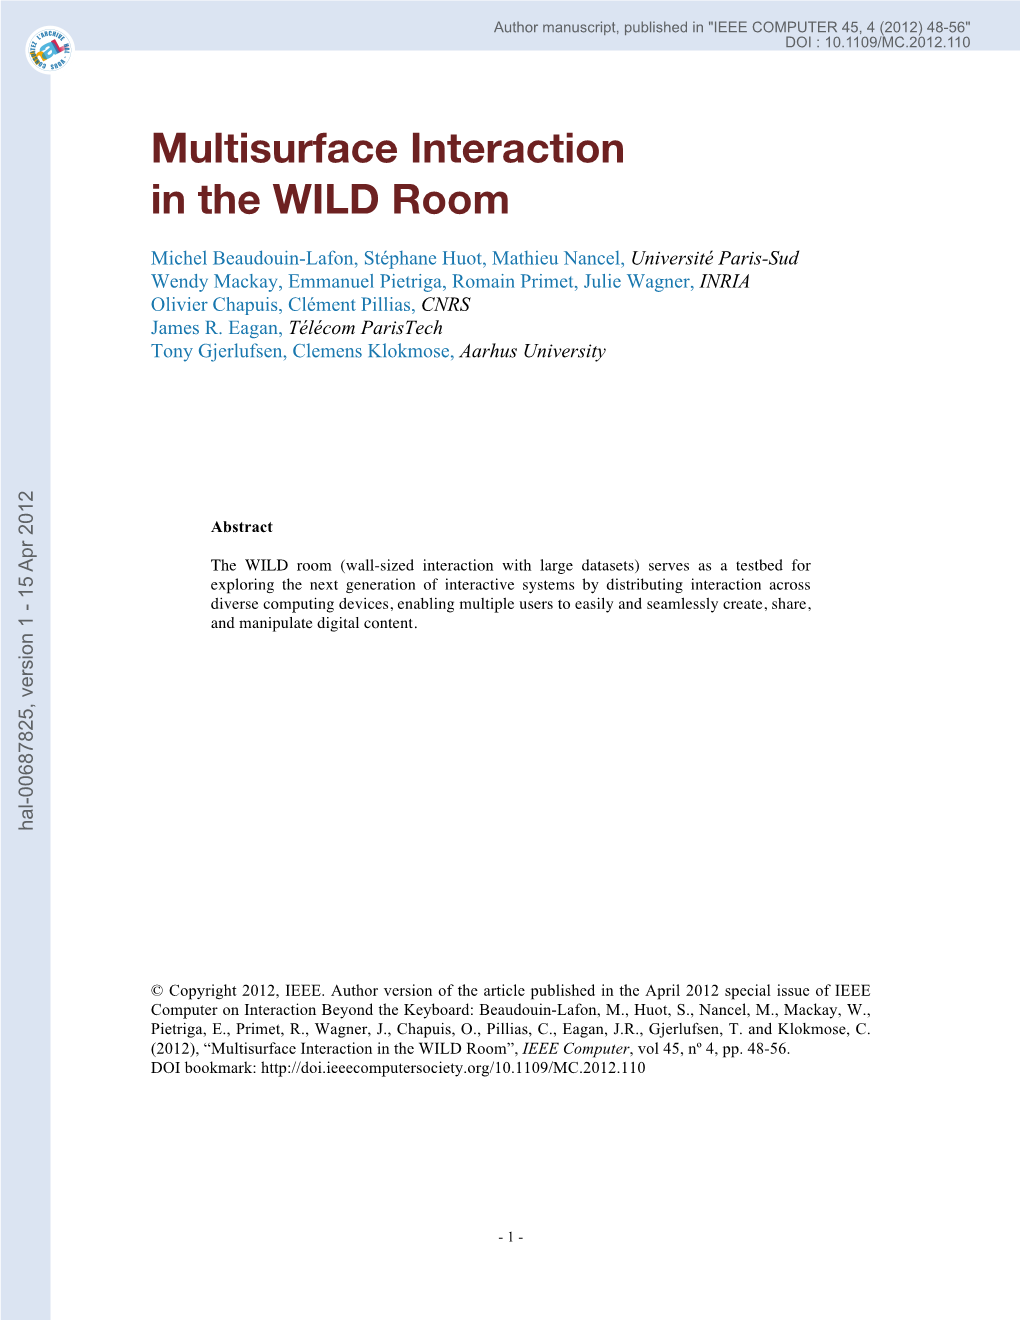 [Hal-00687825, V1] Multisurface Interaction in the WILD Room